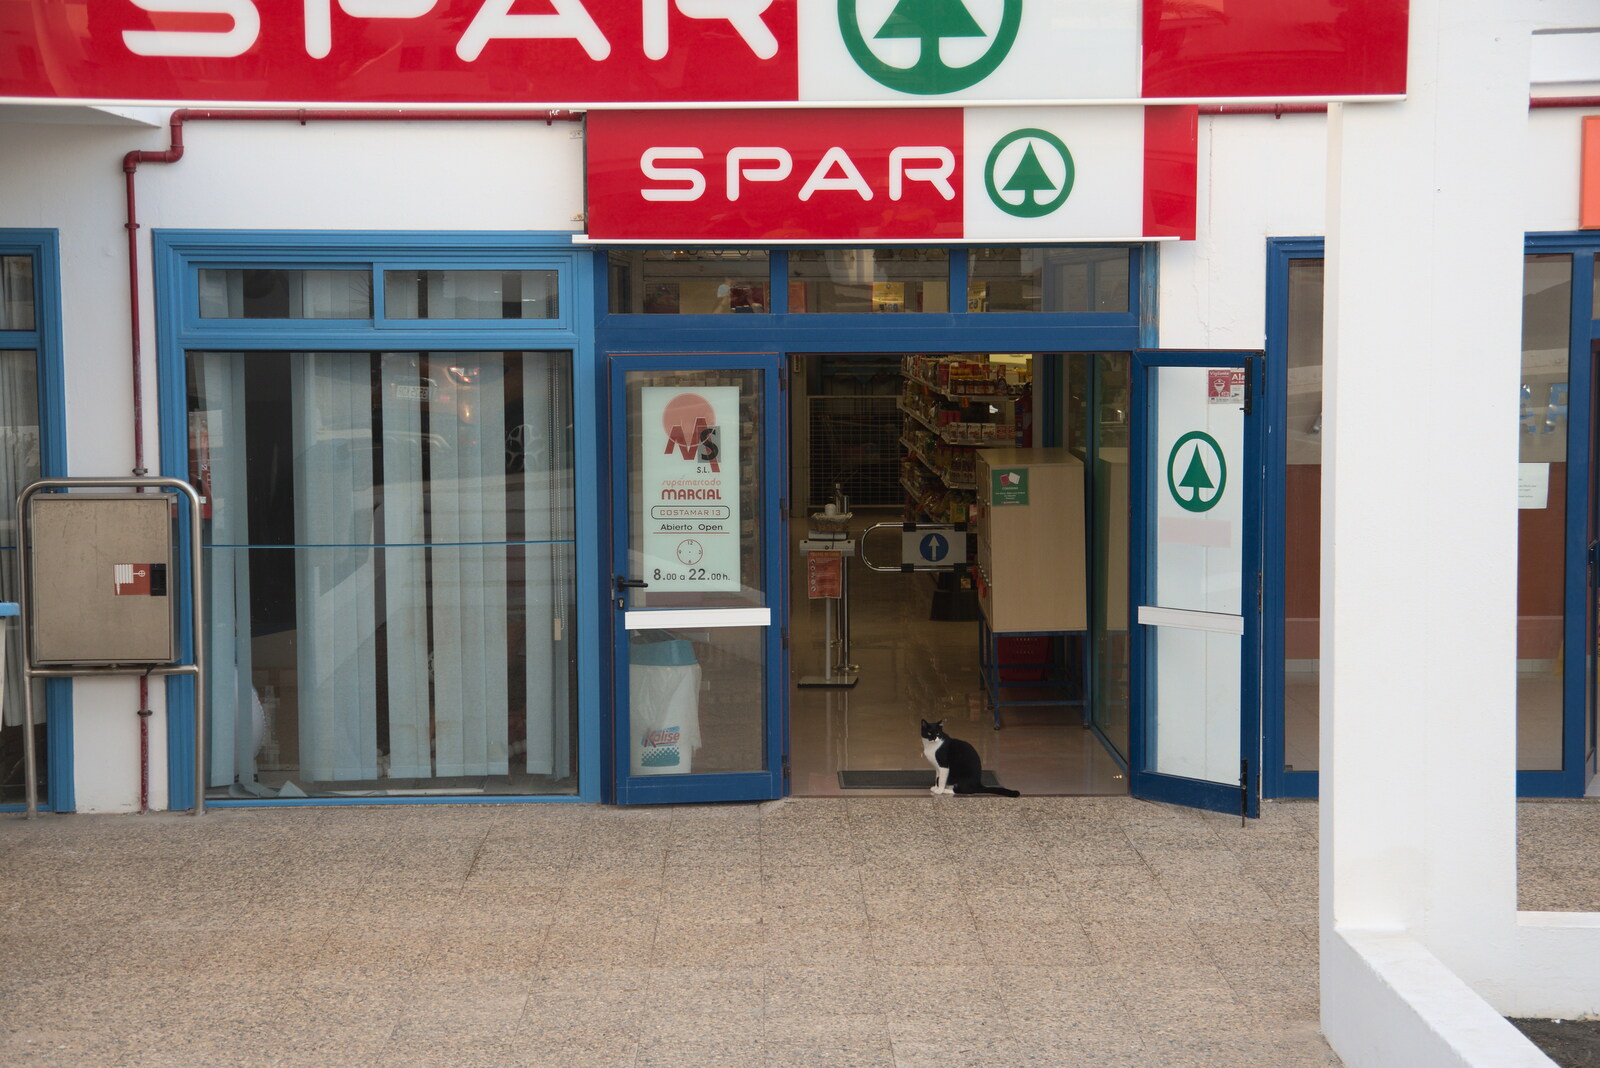 The Spar cat hangs around from The Volcanoes of Lanzarote, Canary Islands, Spain - 27th October 2021